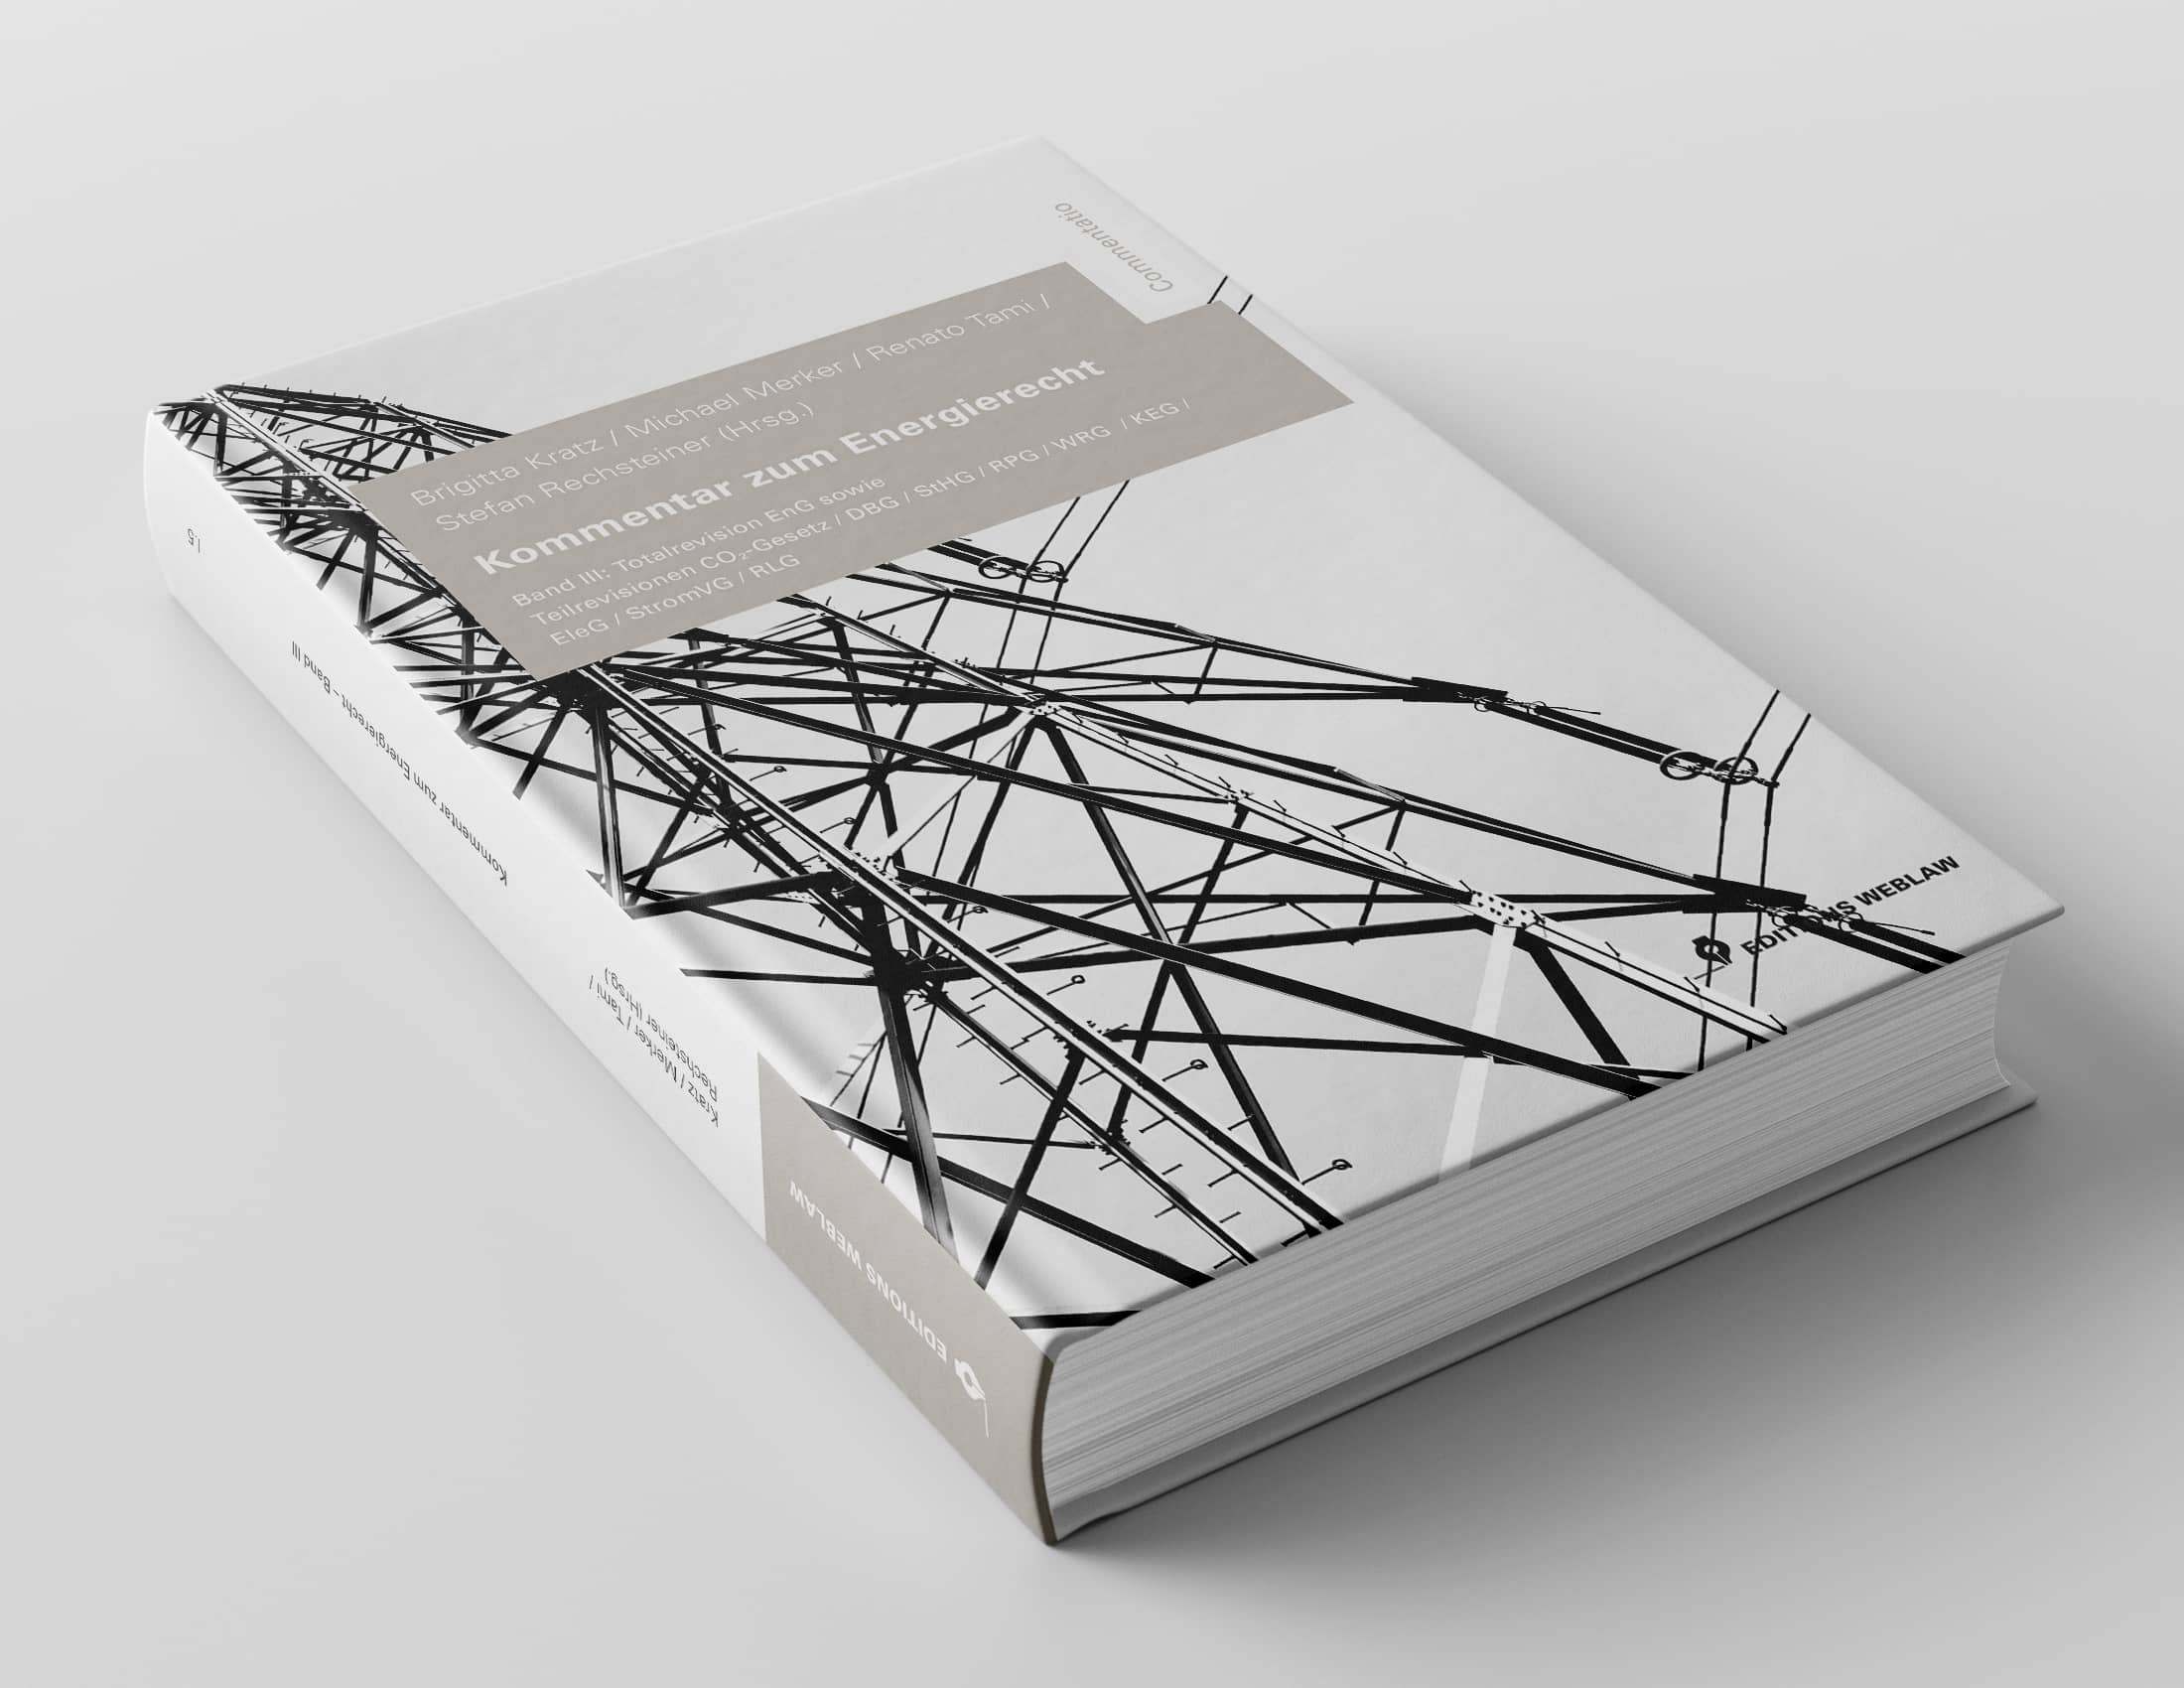 Photo of the book. The image on the cover represents an electric pylon.